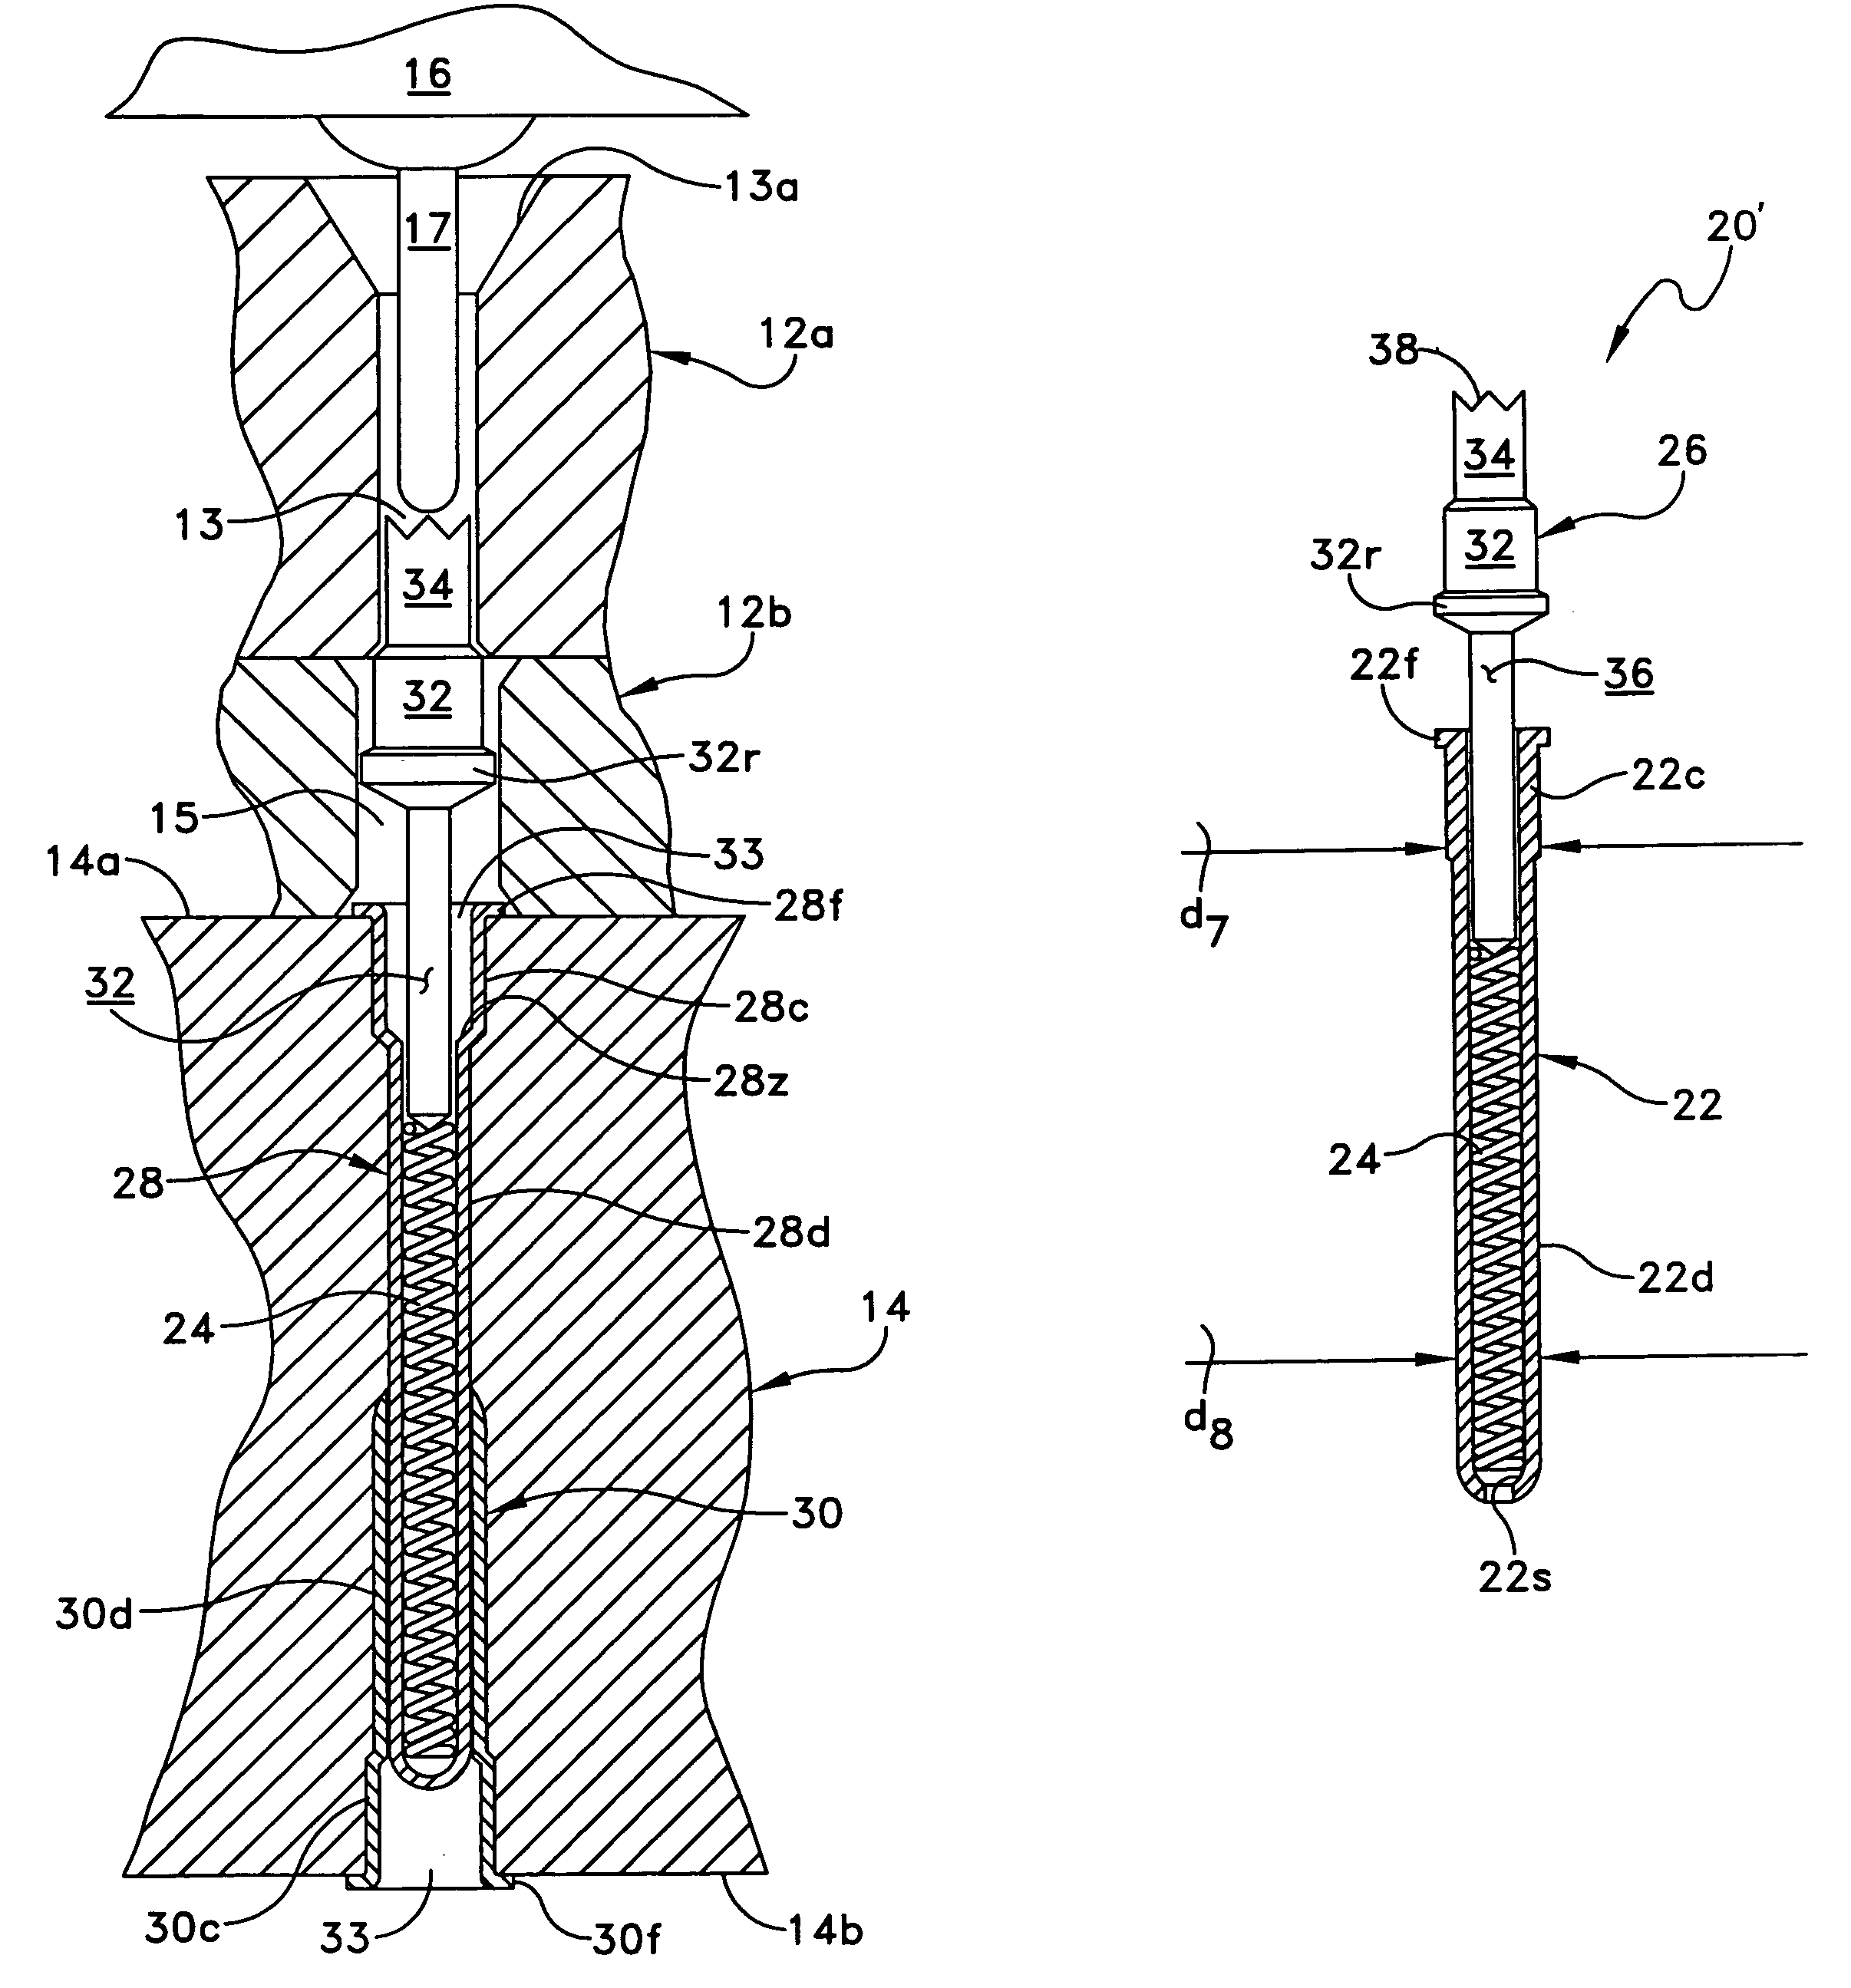 Apparatus for interfacing electronic packages and test equipment